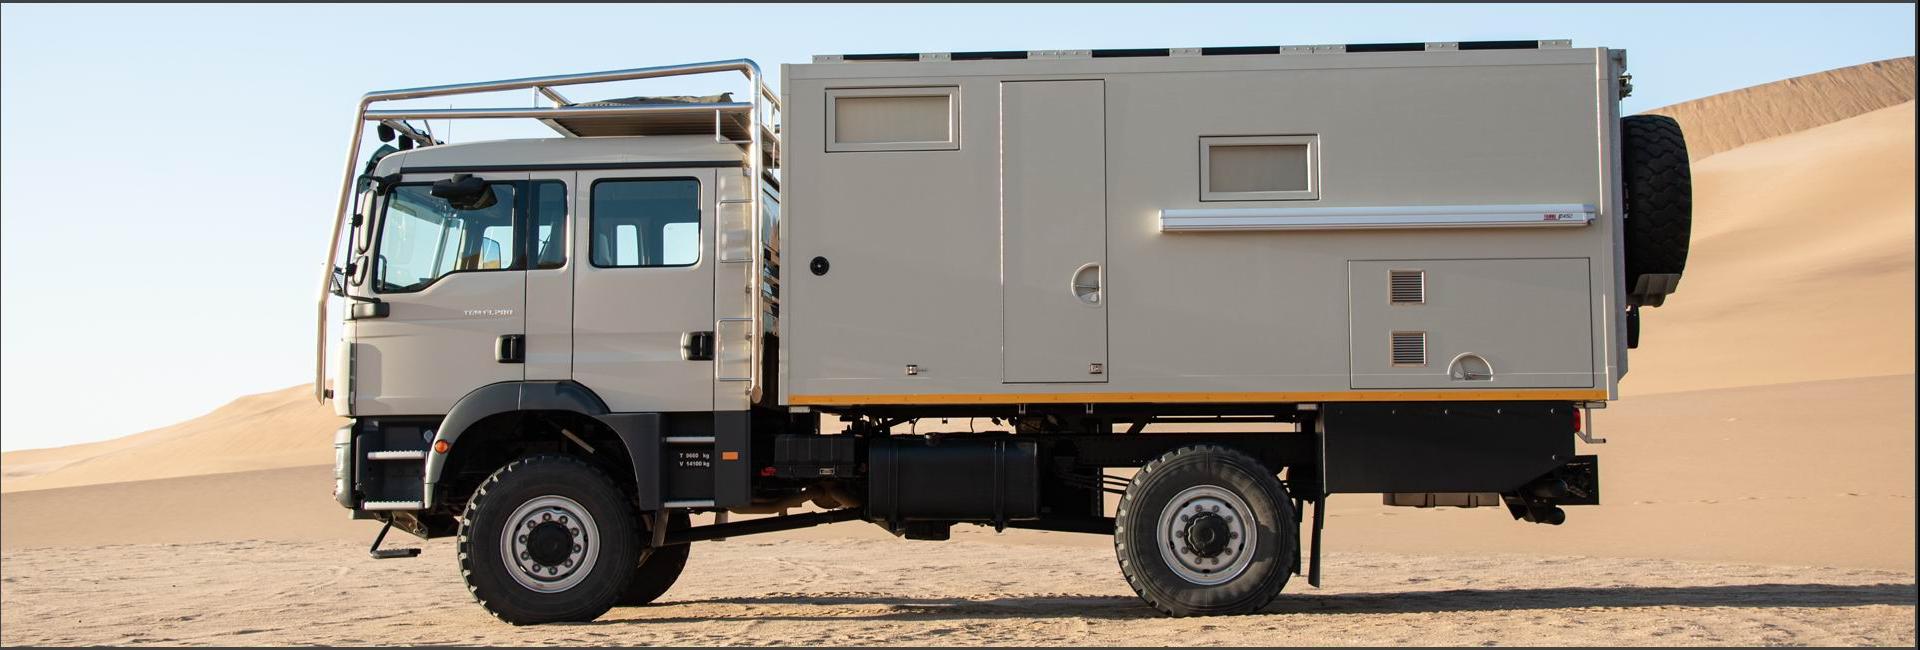 MAN TGM Double Cab Expedition Truck